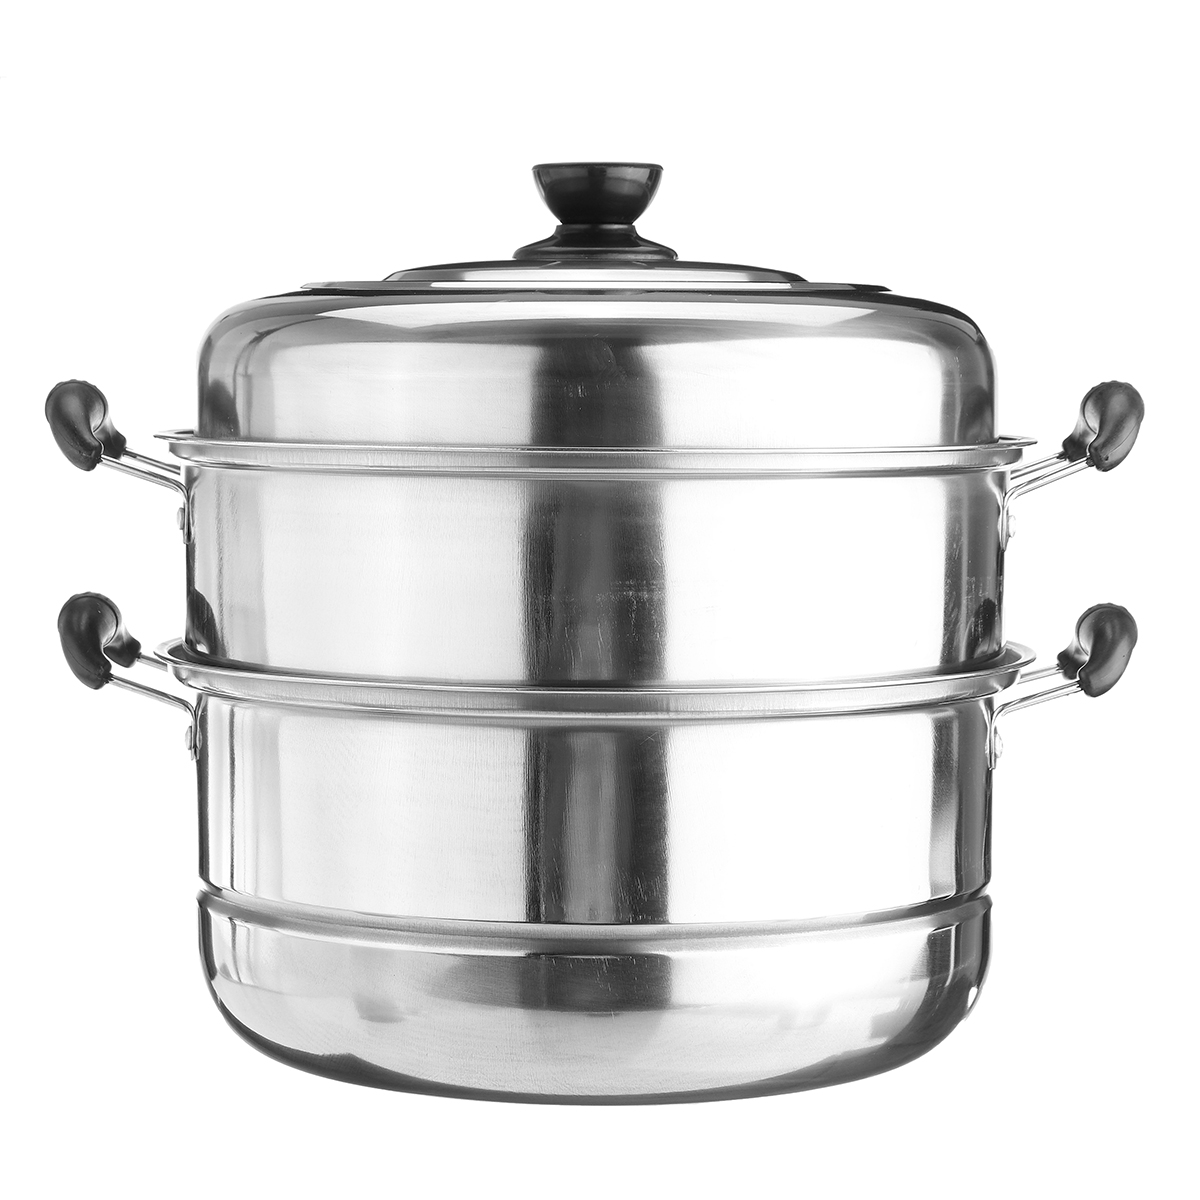 3-Tier-Stainless-Steel-Pot-Steamer-Steam-Cooking-Cooker-Cookware-Hot-Pot-Kitchen-Cooking-Tools-1672892-7